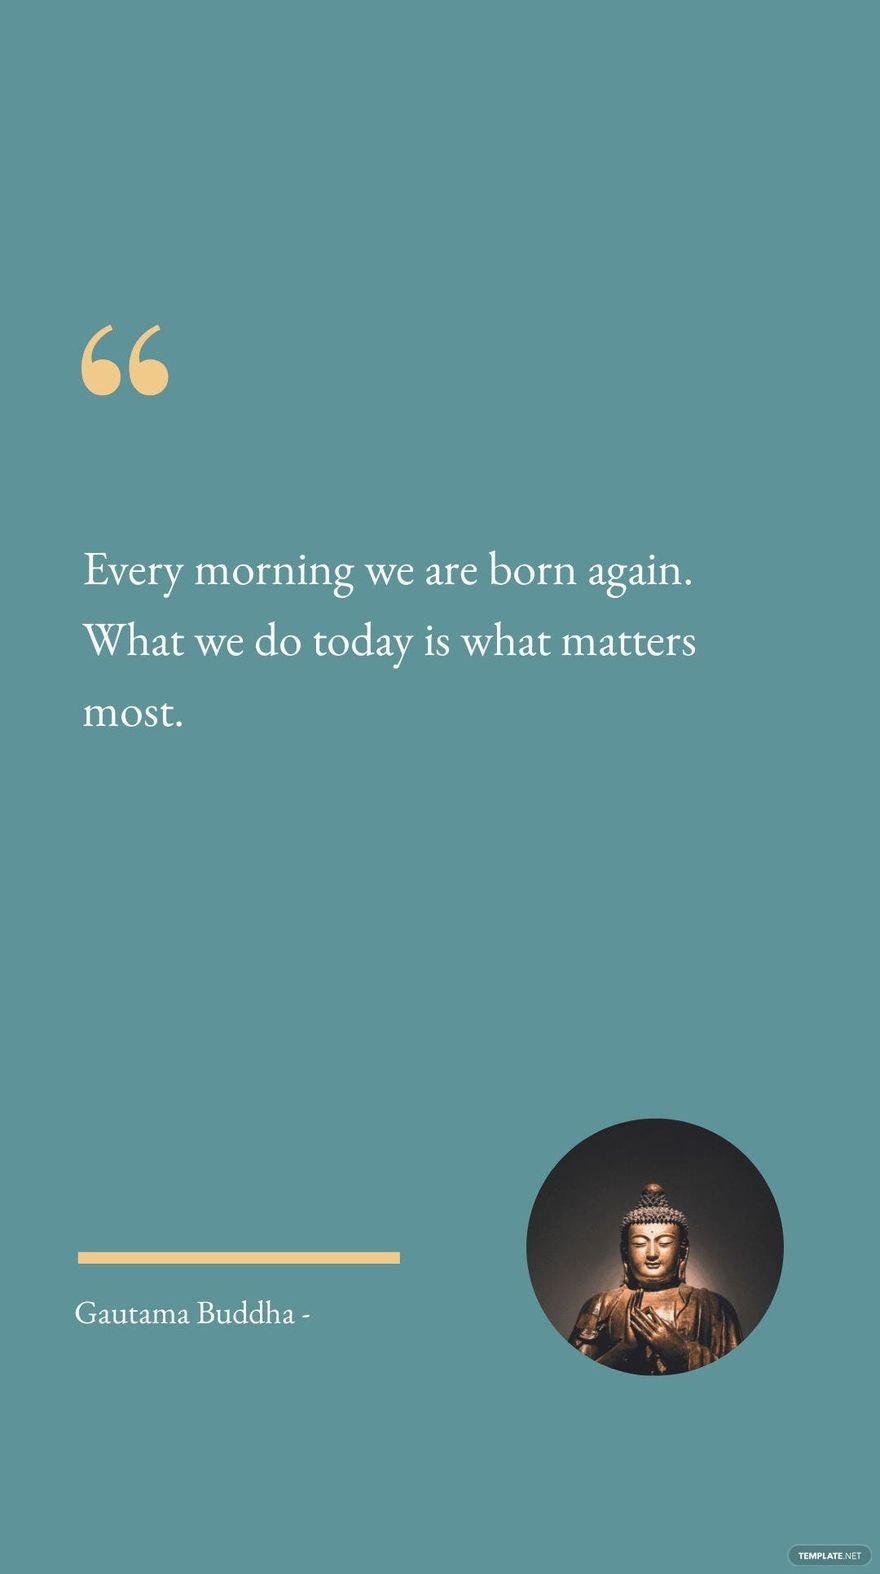 Gautama Buddha - Every morning we are born again. What we do today is what matters most.